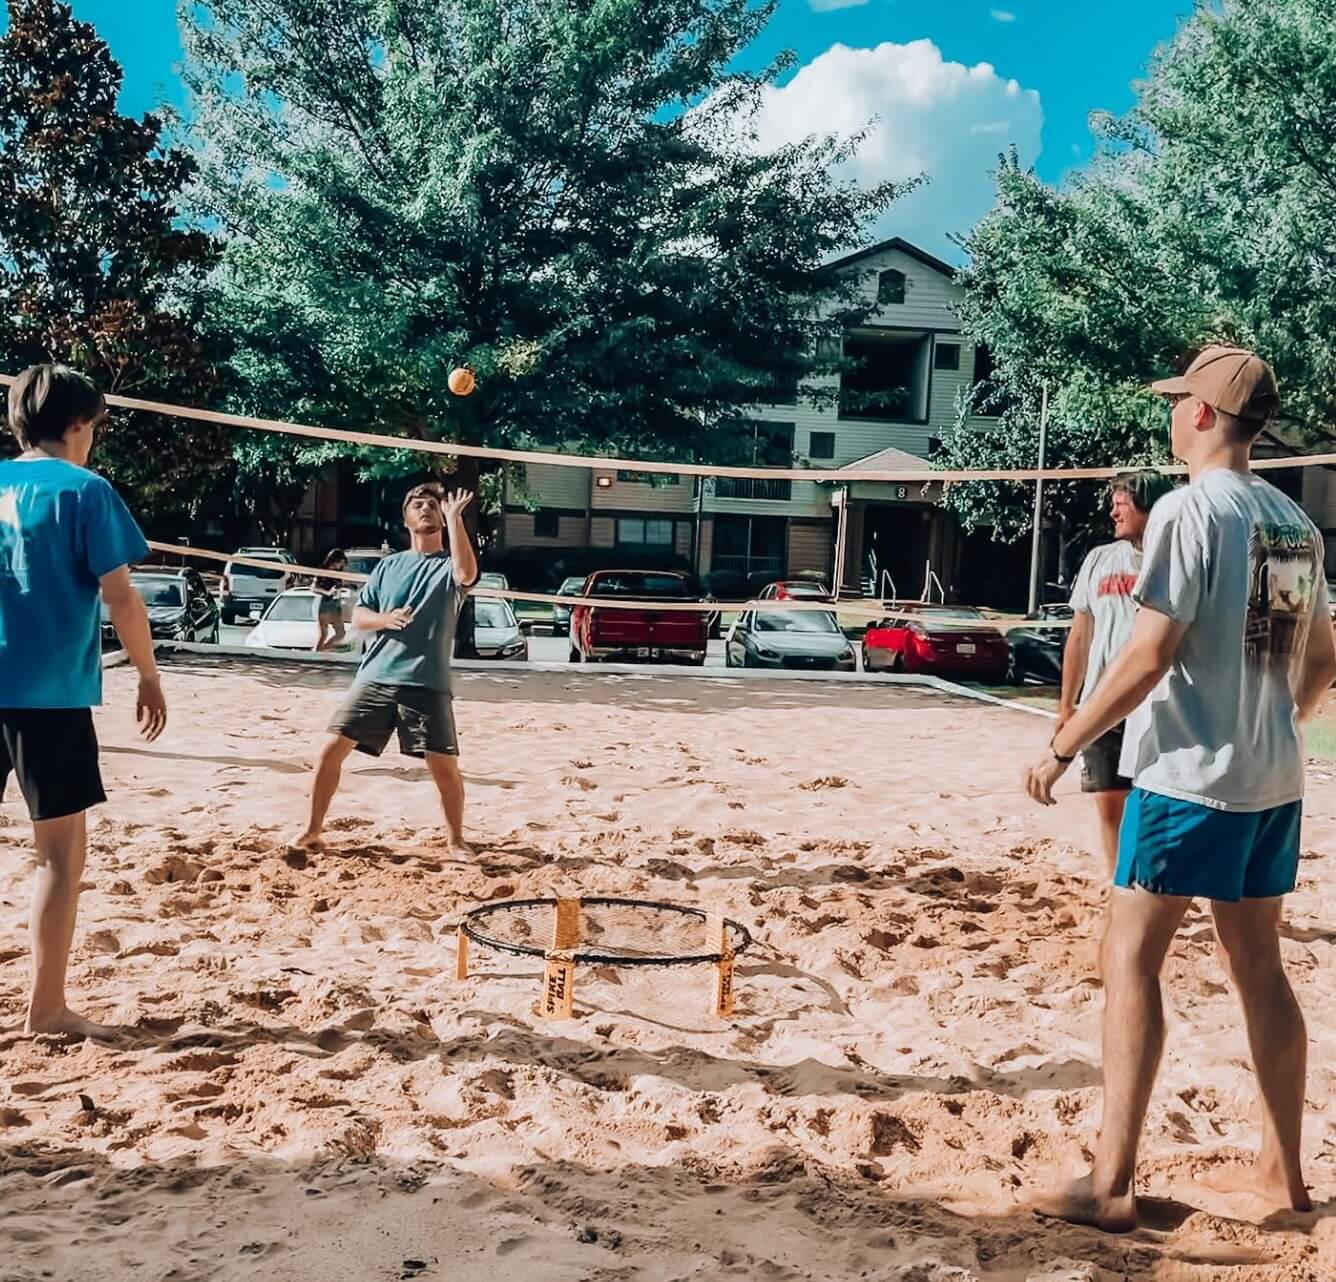 A group of friends enjoys a sunny day playing a ball game on a sandy court, savoring the casual, fun moments of outdoor activities.